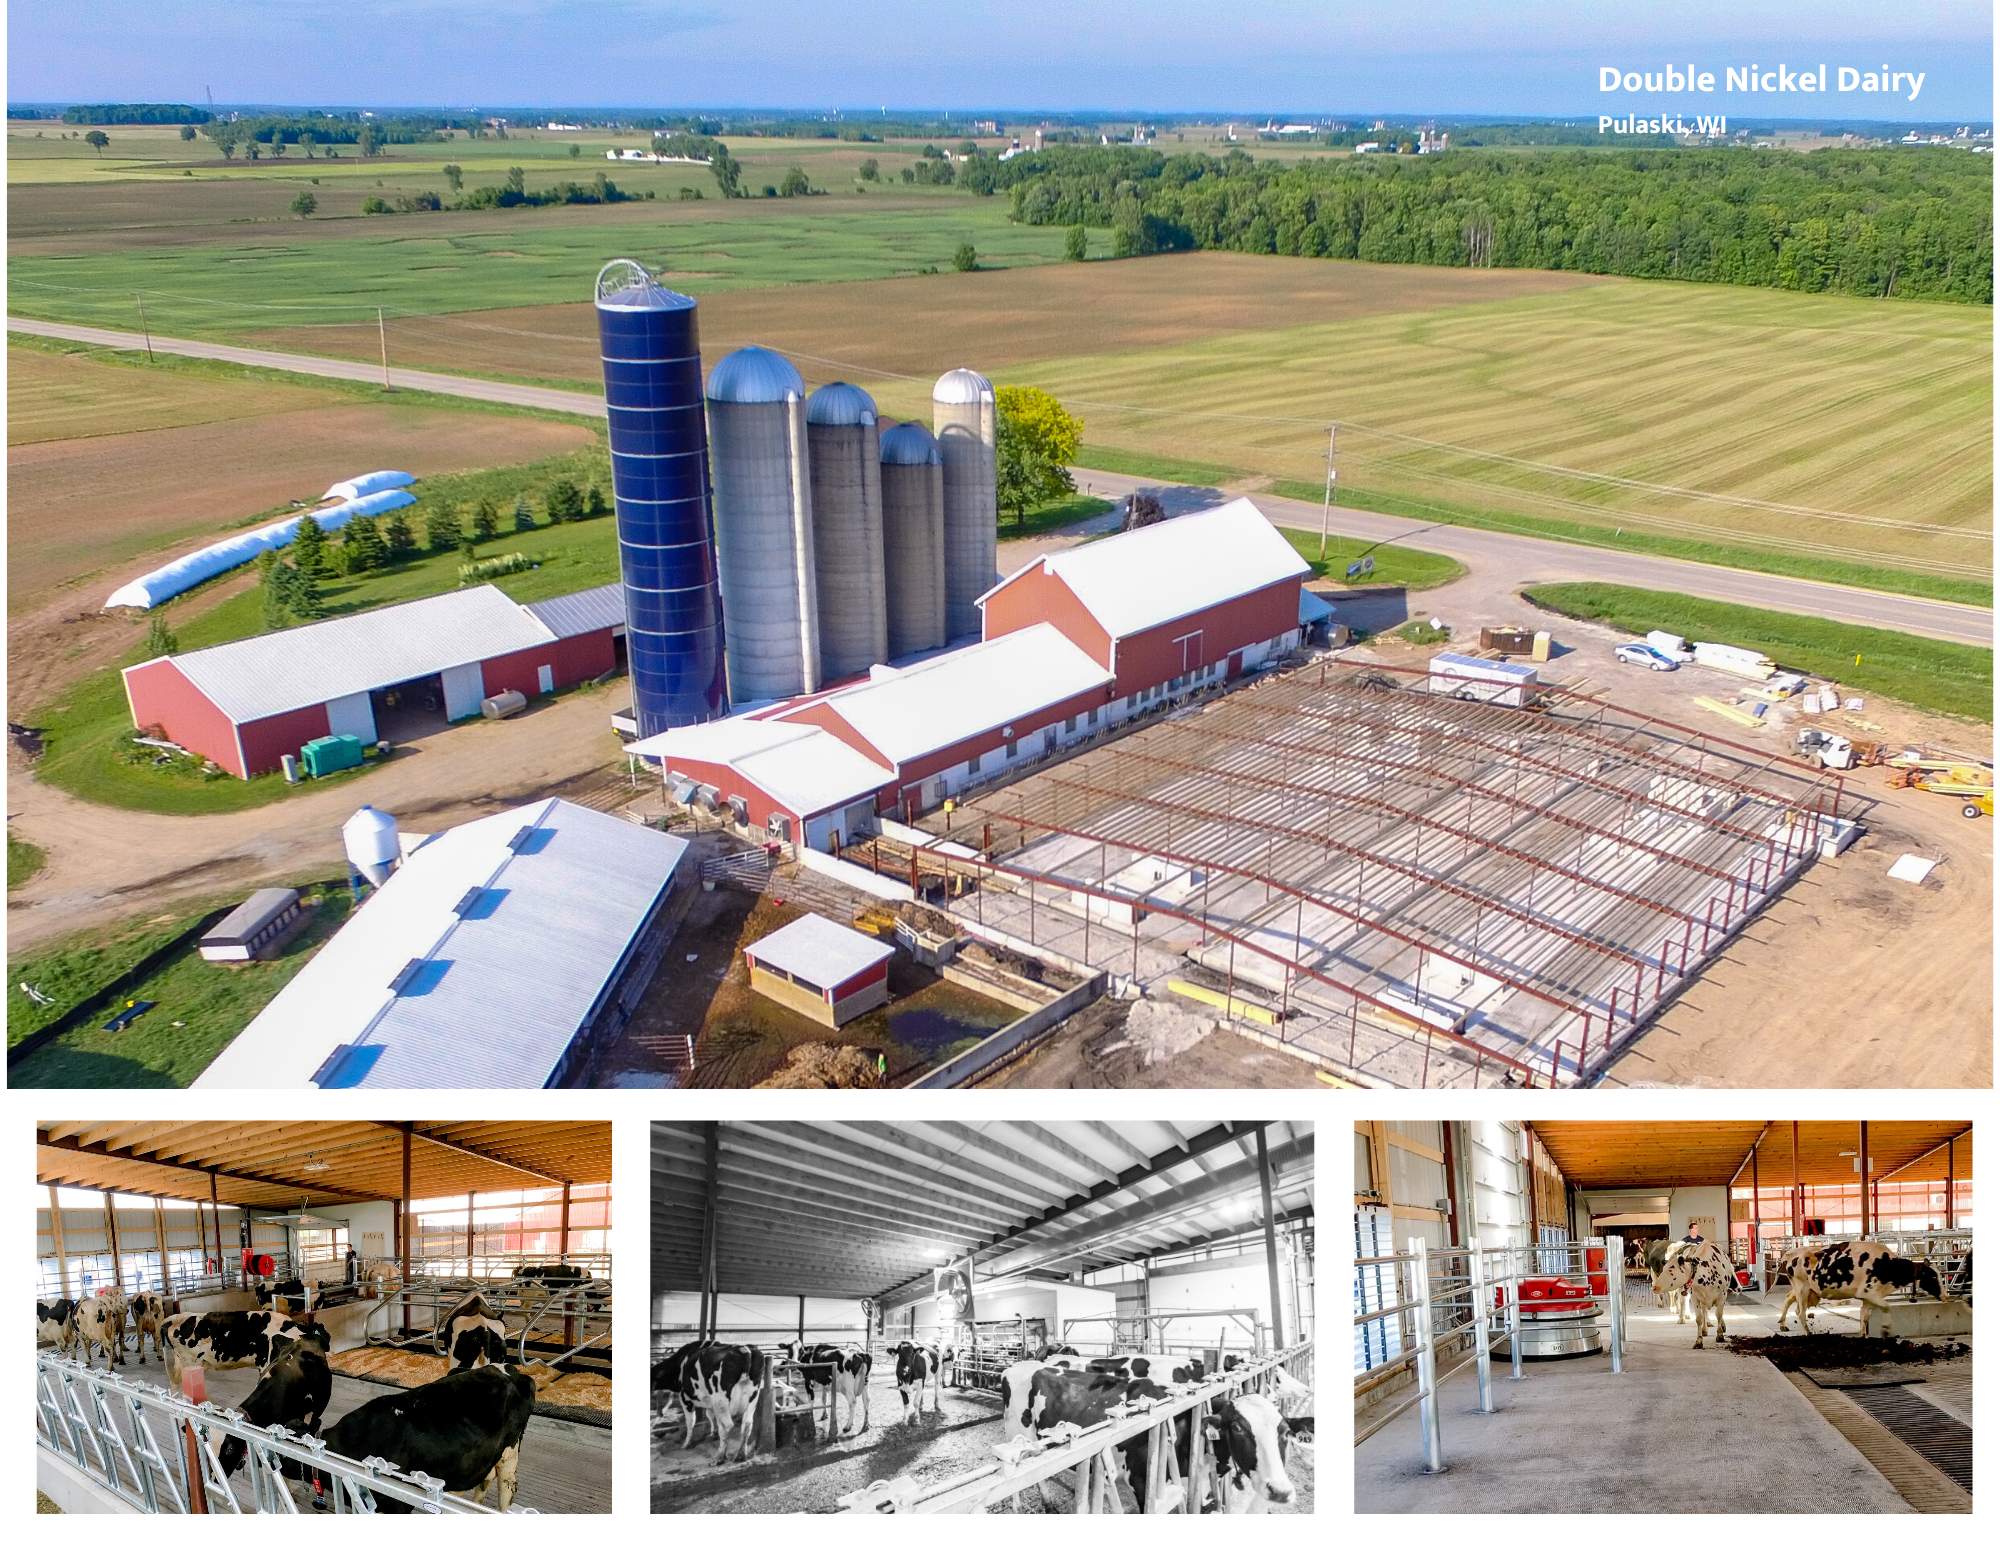 Agricultural Construction: Robot Dairy: Double Nickel Dairy, Pulaski, WI